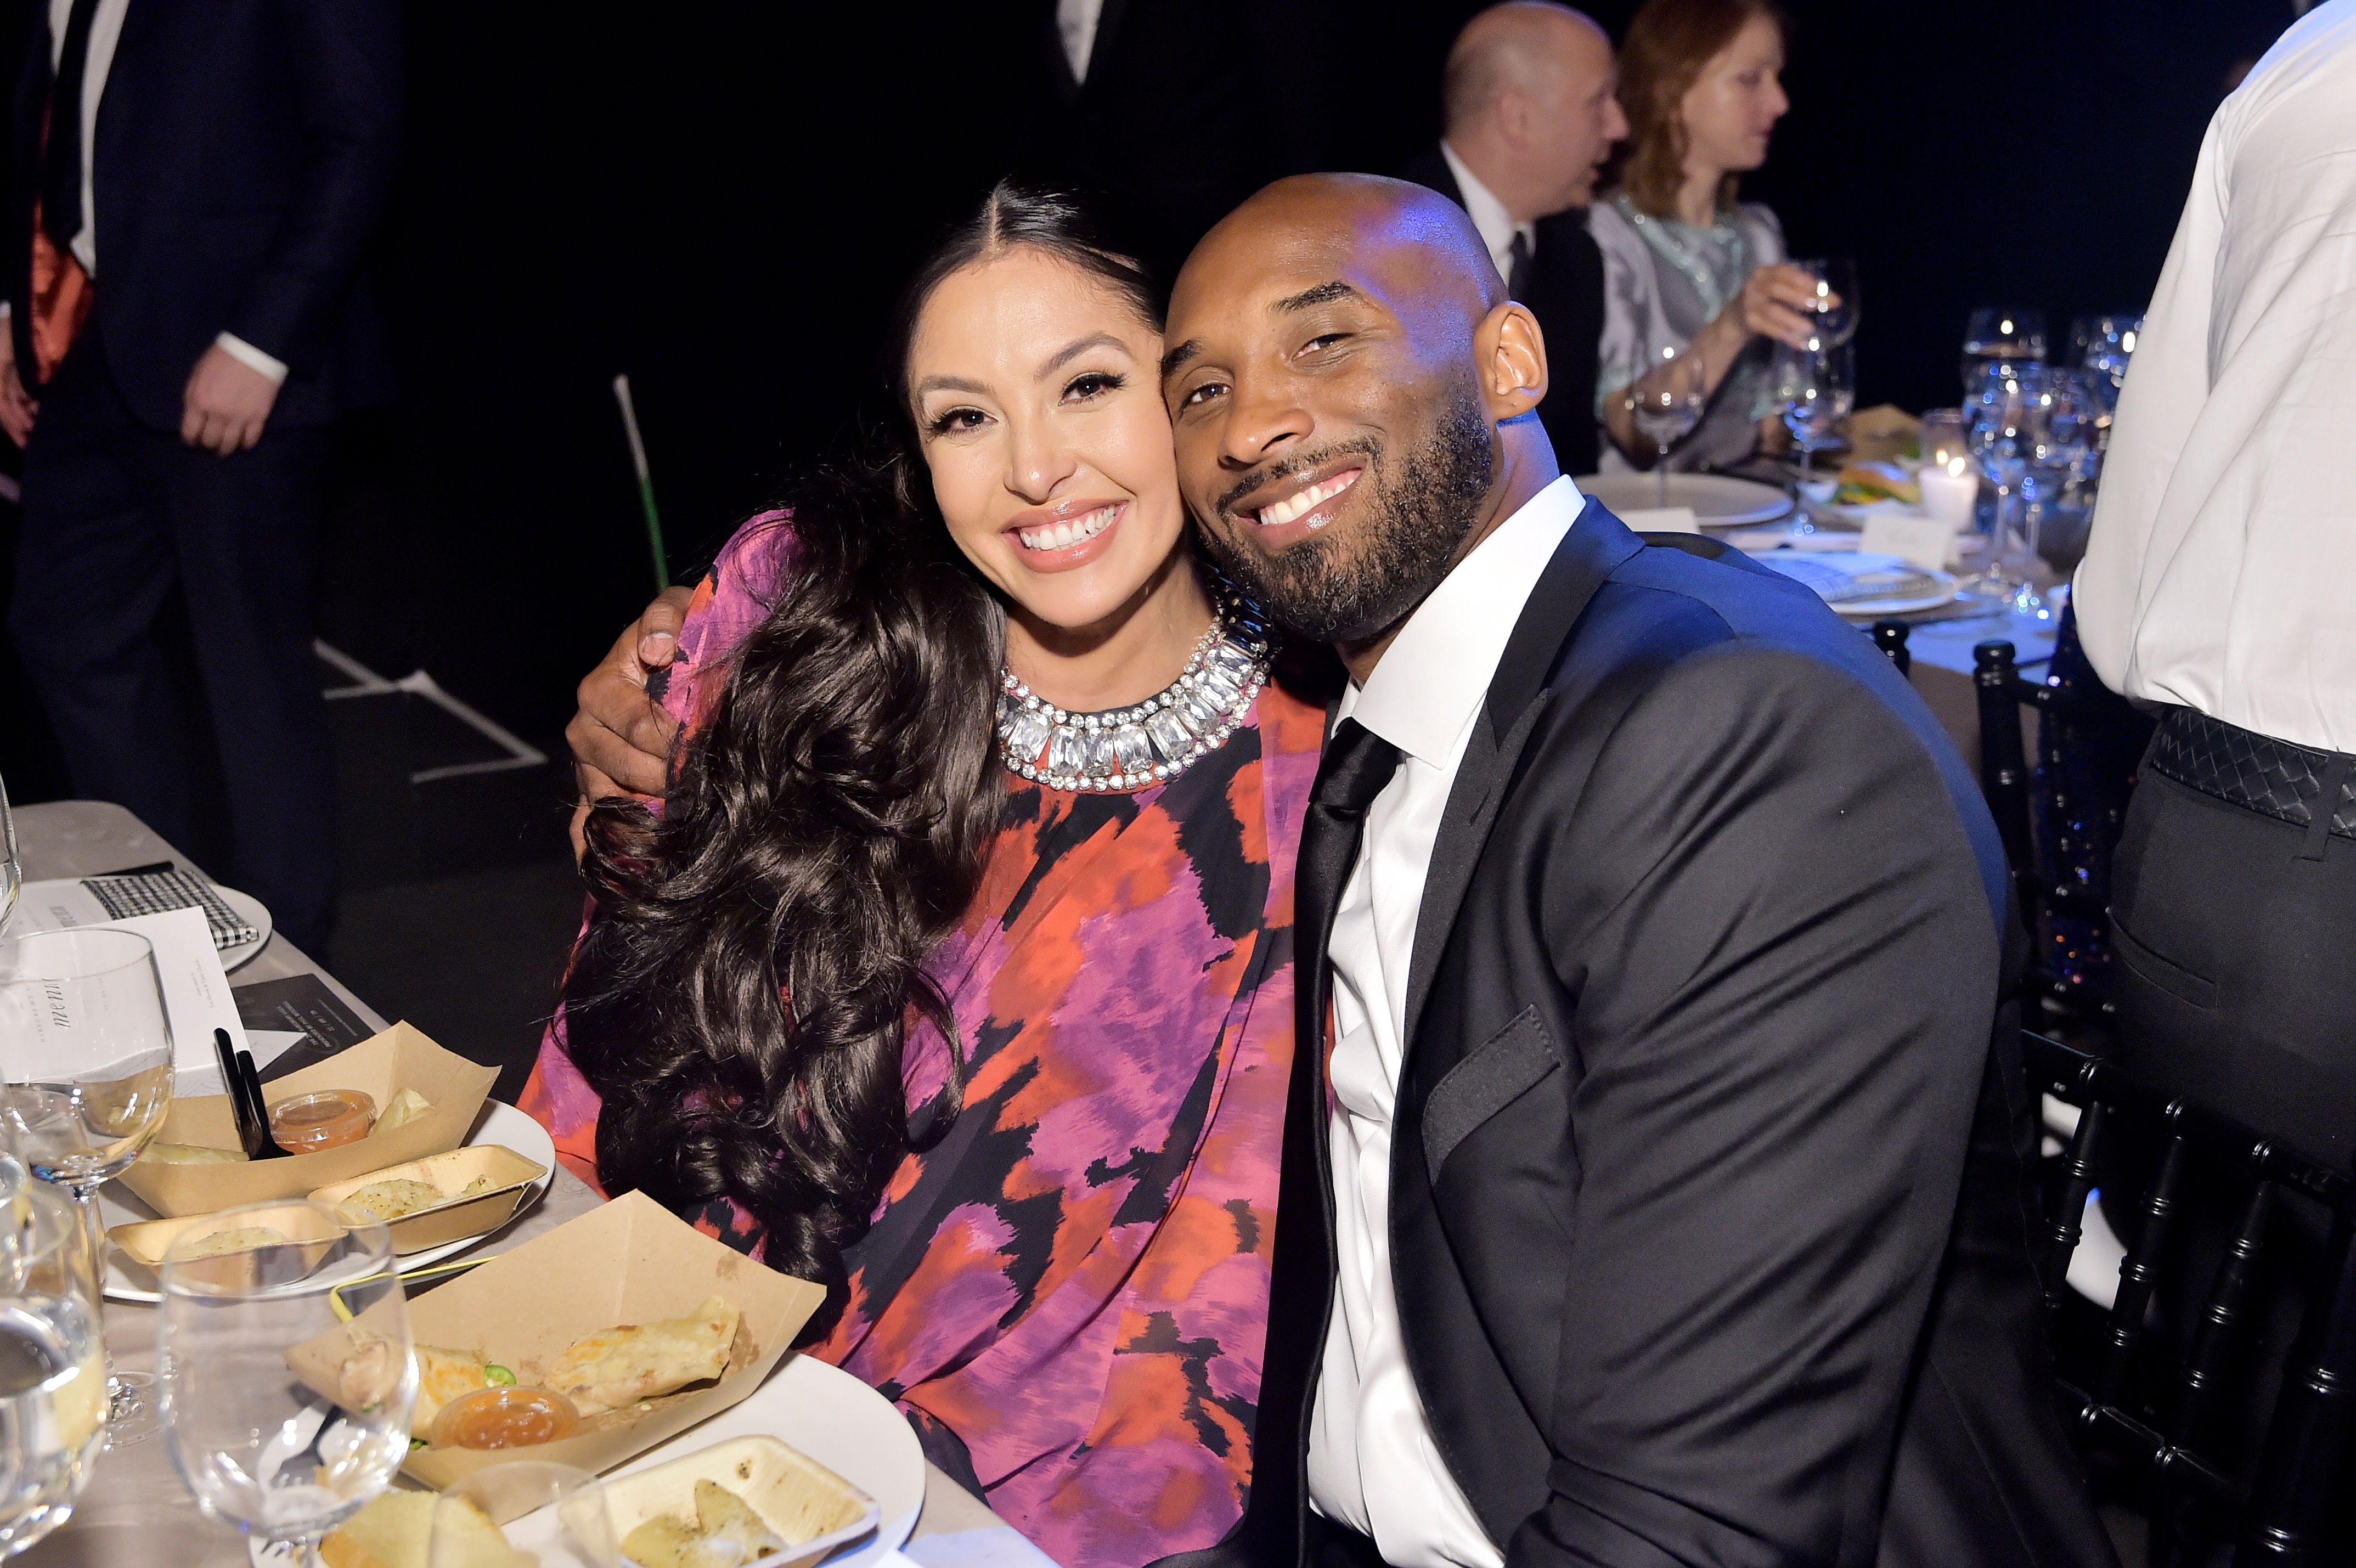 Vanessa Bryant and Kobe Bryant at the 2019 Baby2Baby Gala presented by Paul Mitchell on November 09, 2019 | Photo: Getty Images